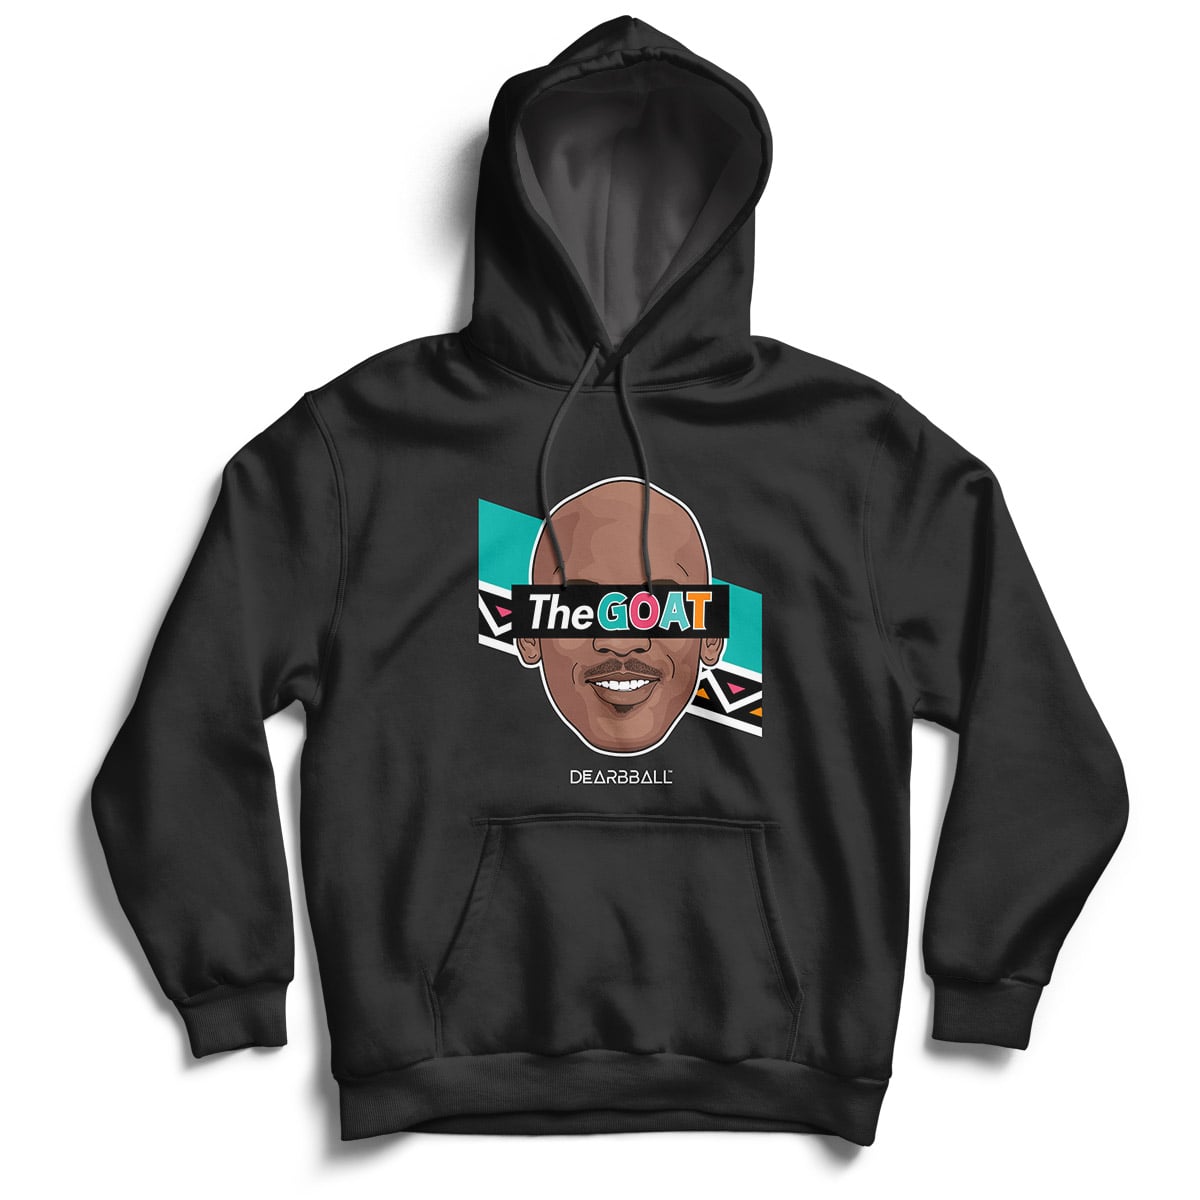 Sudadera con capucha DearBBall - TheGOAT 1996 All Star Game Edition